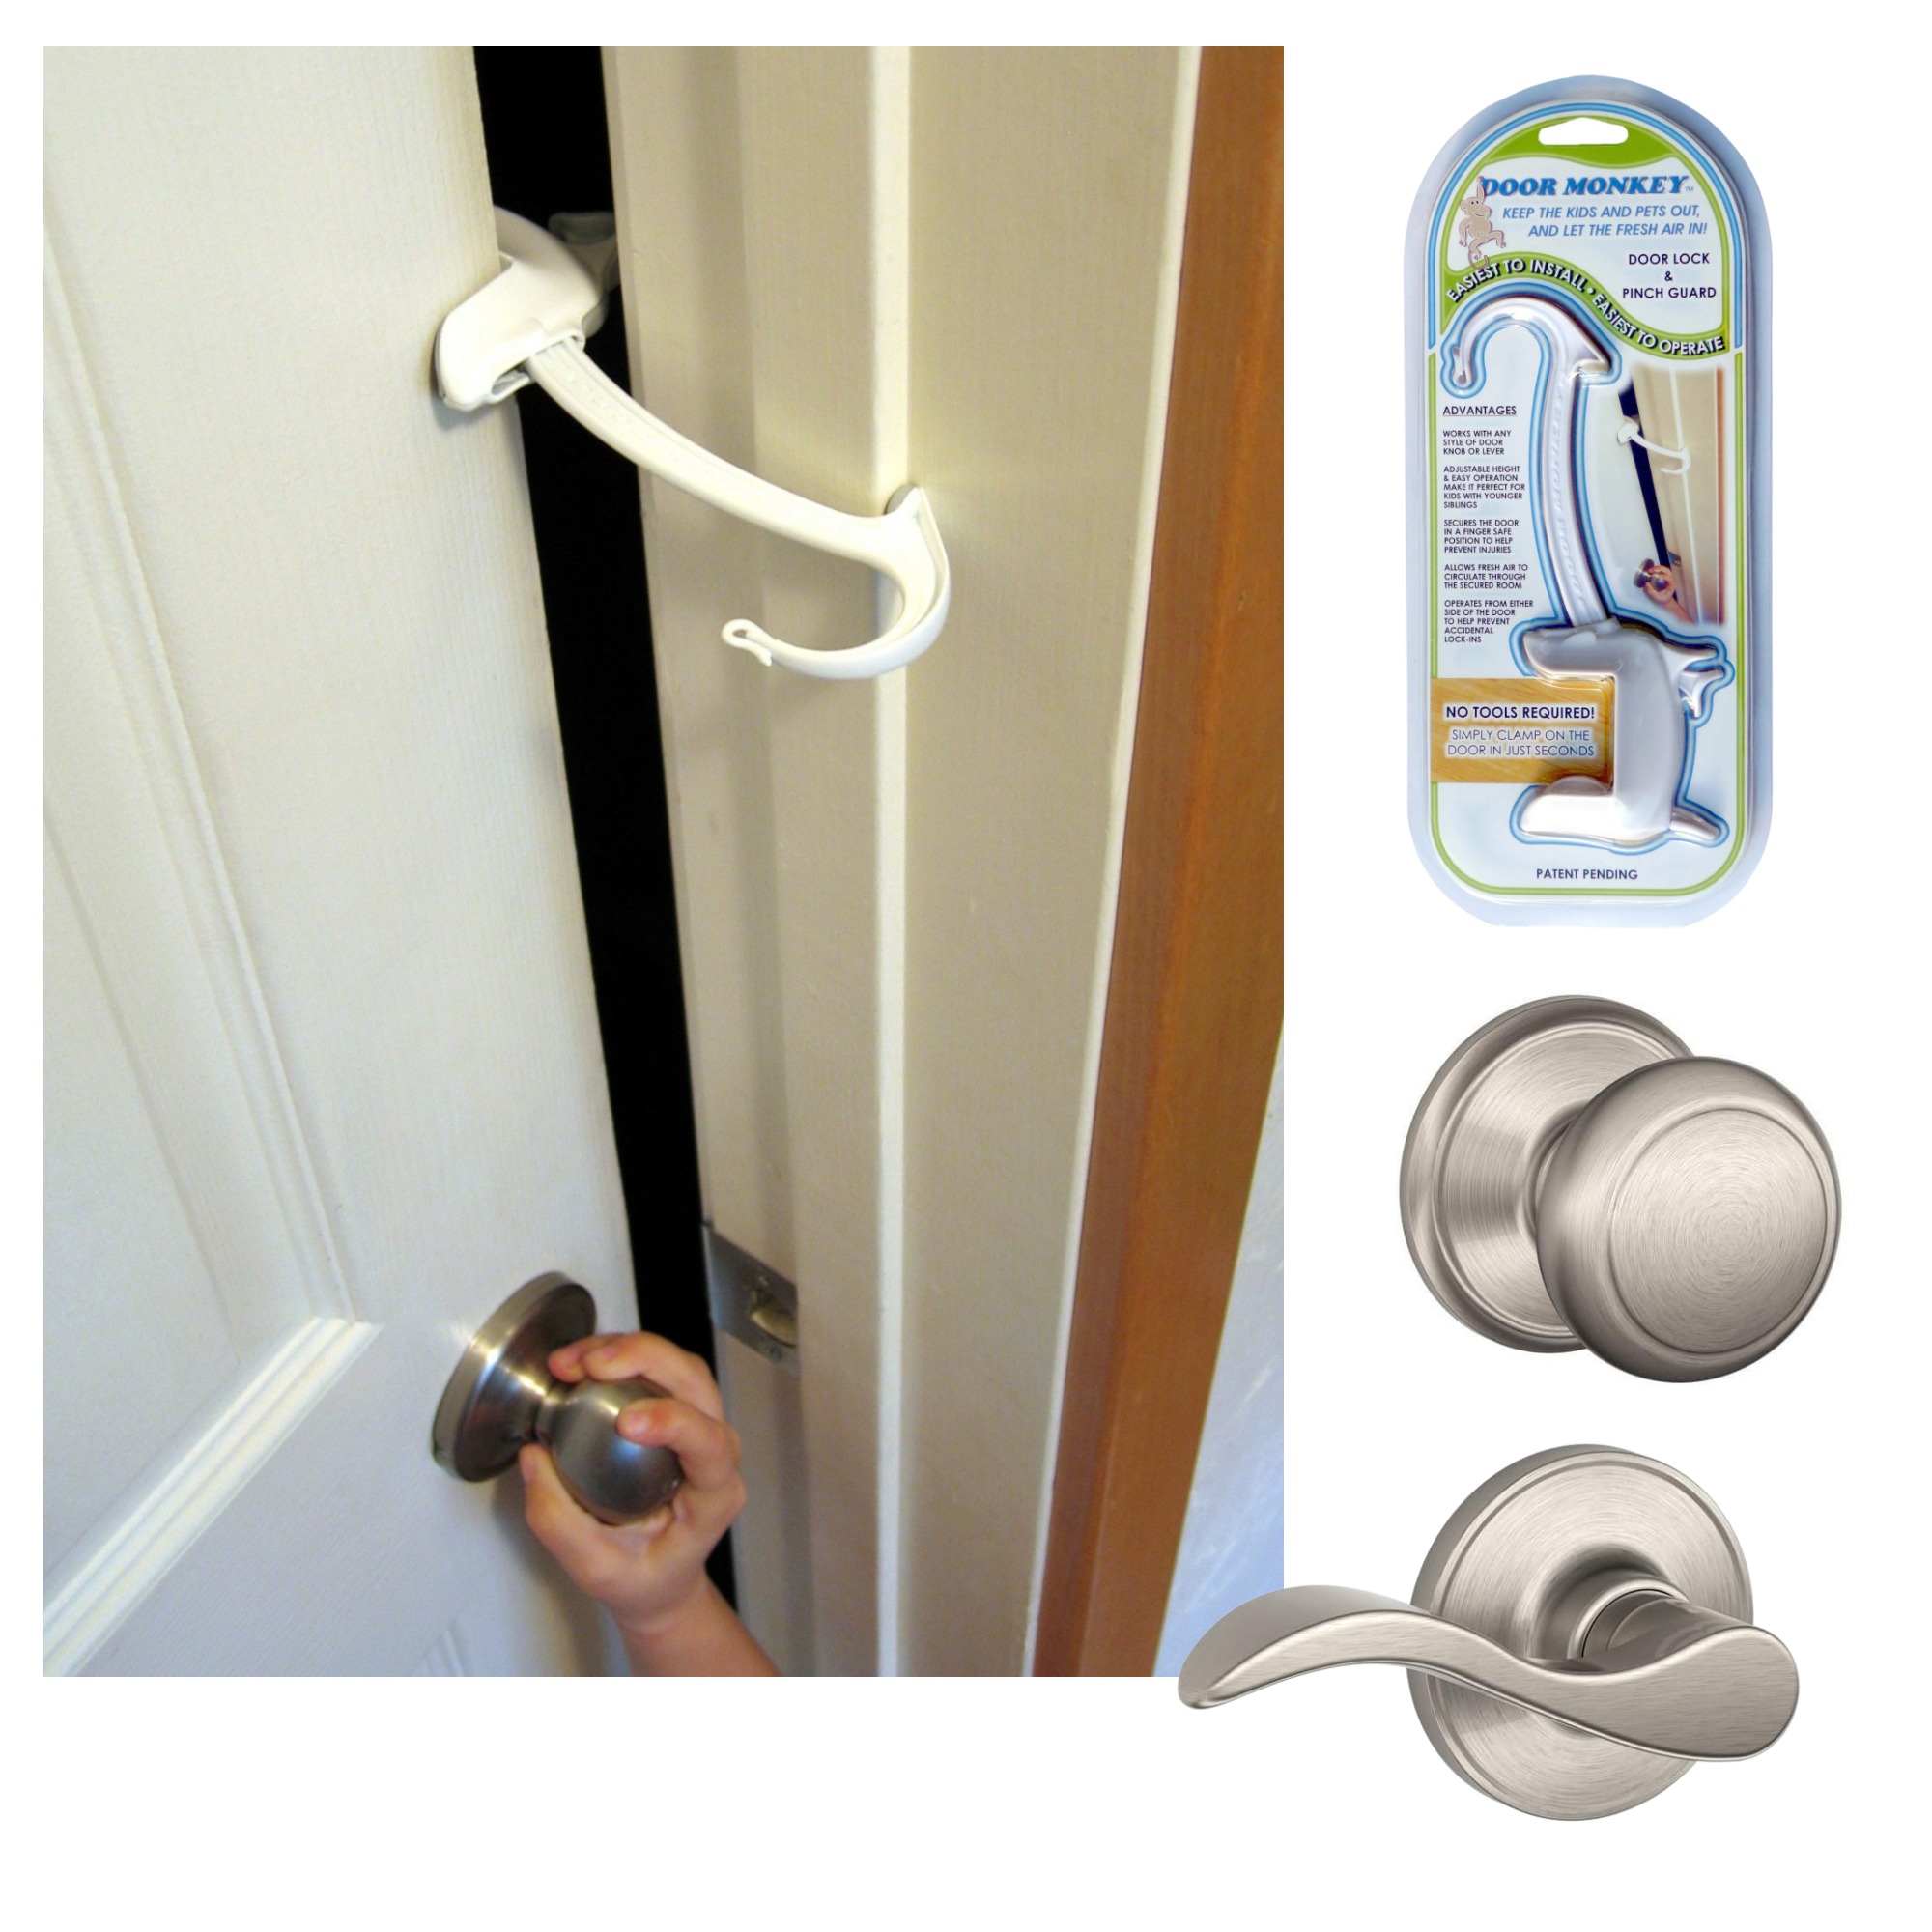 DOOR MONKEY Child Proof Door Lock & Pinch Guard - For Door Knobs & Lever Handles- Easy to Install-No Tools or Tape Required - Baby Safety Door Lock For Kids - Very Portable-Great for Dogs & Cats,White - image 1 of 8